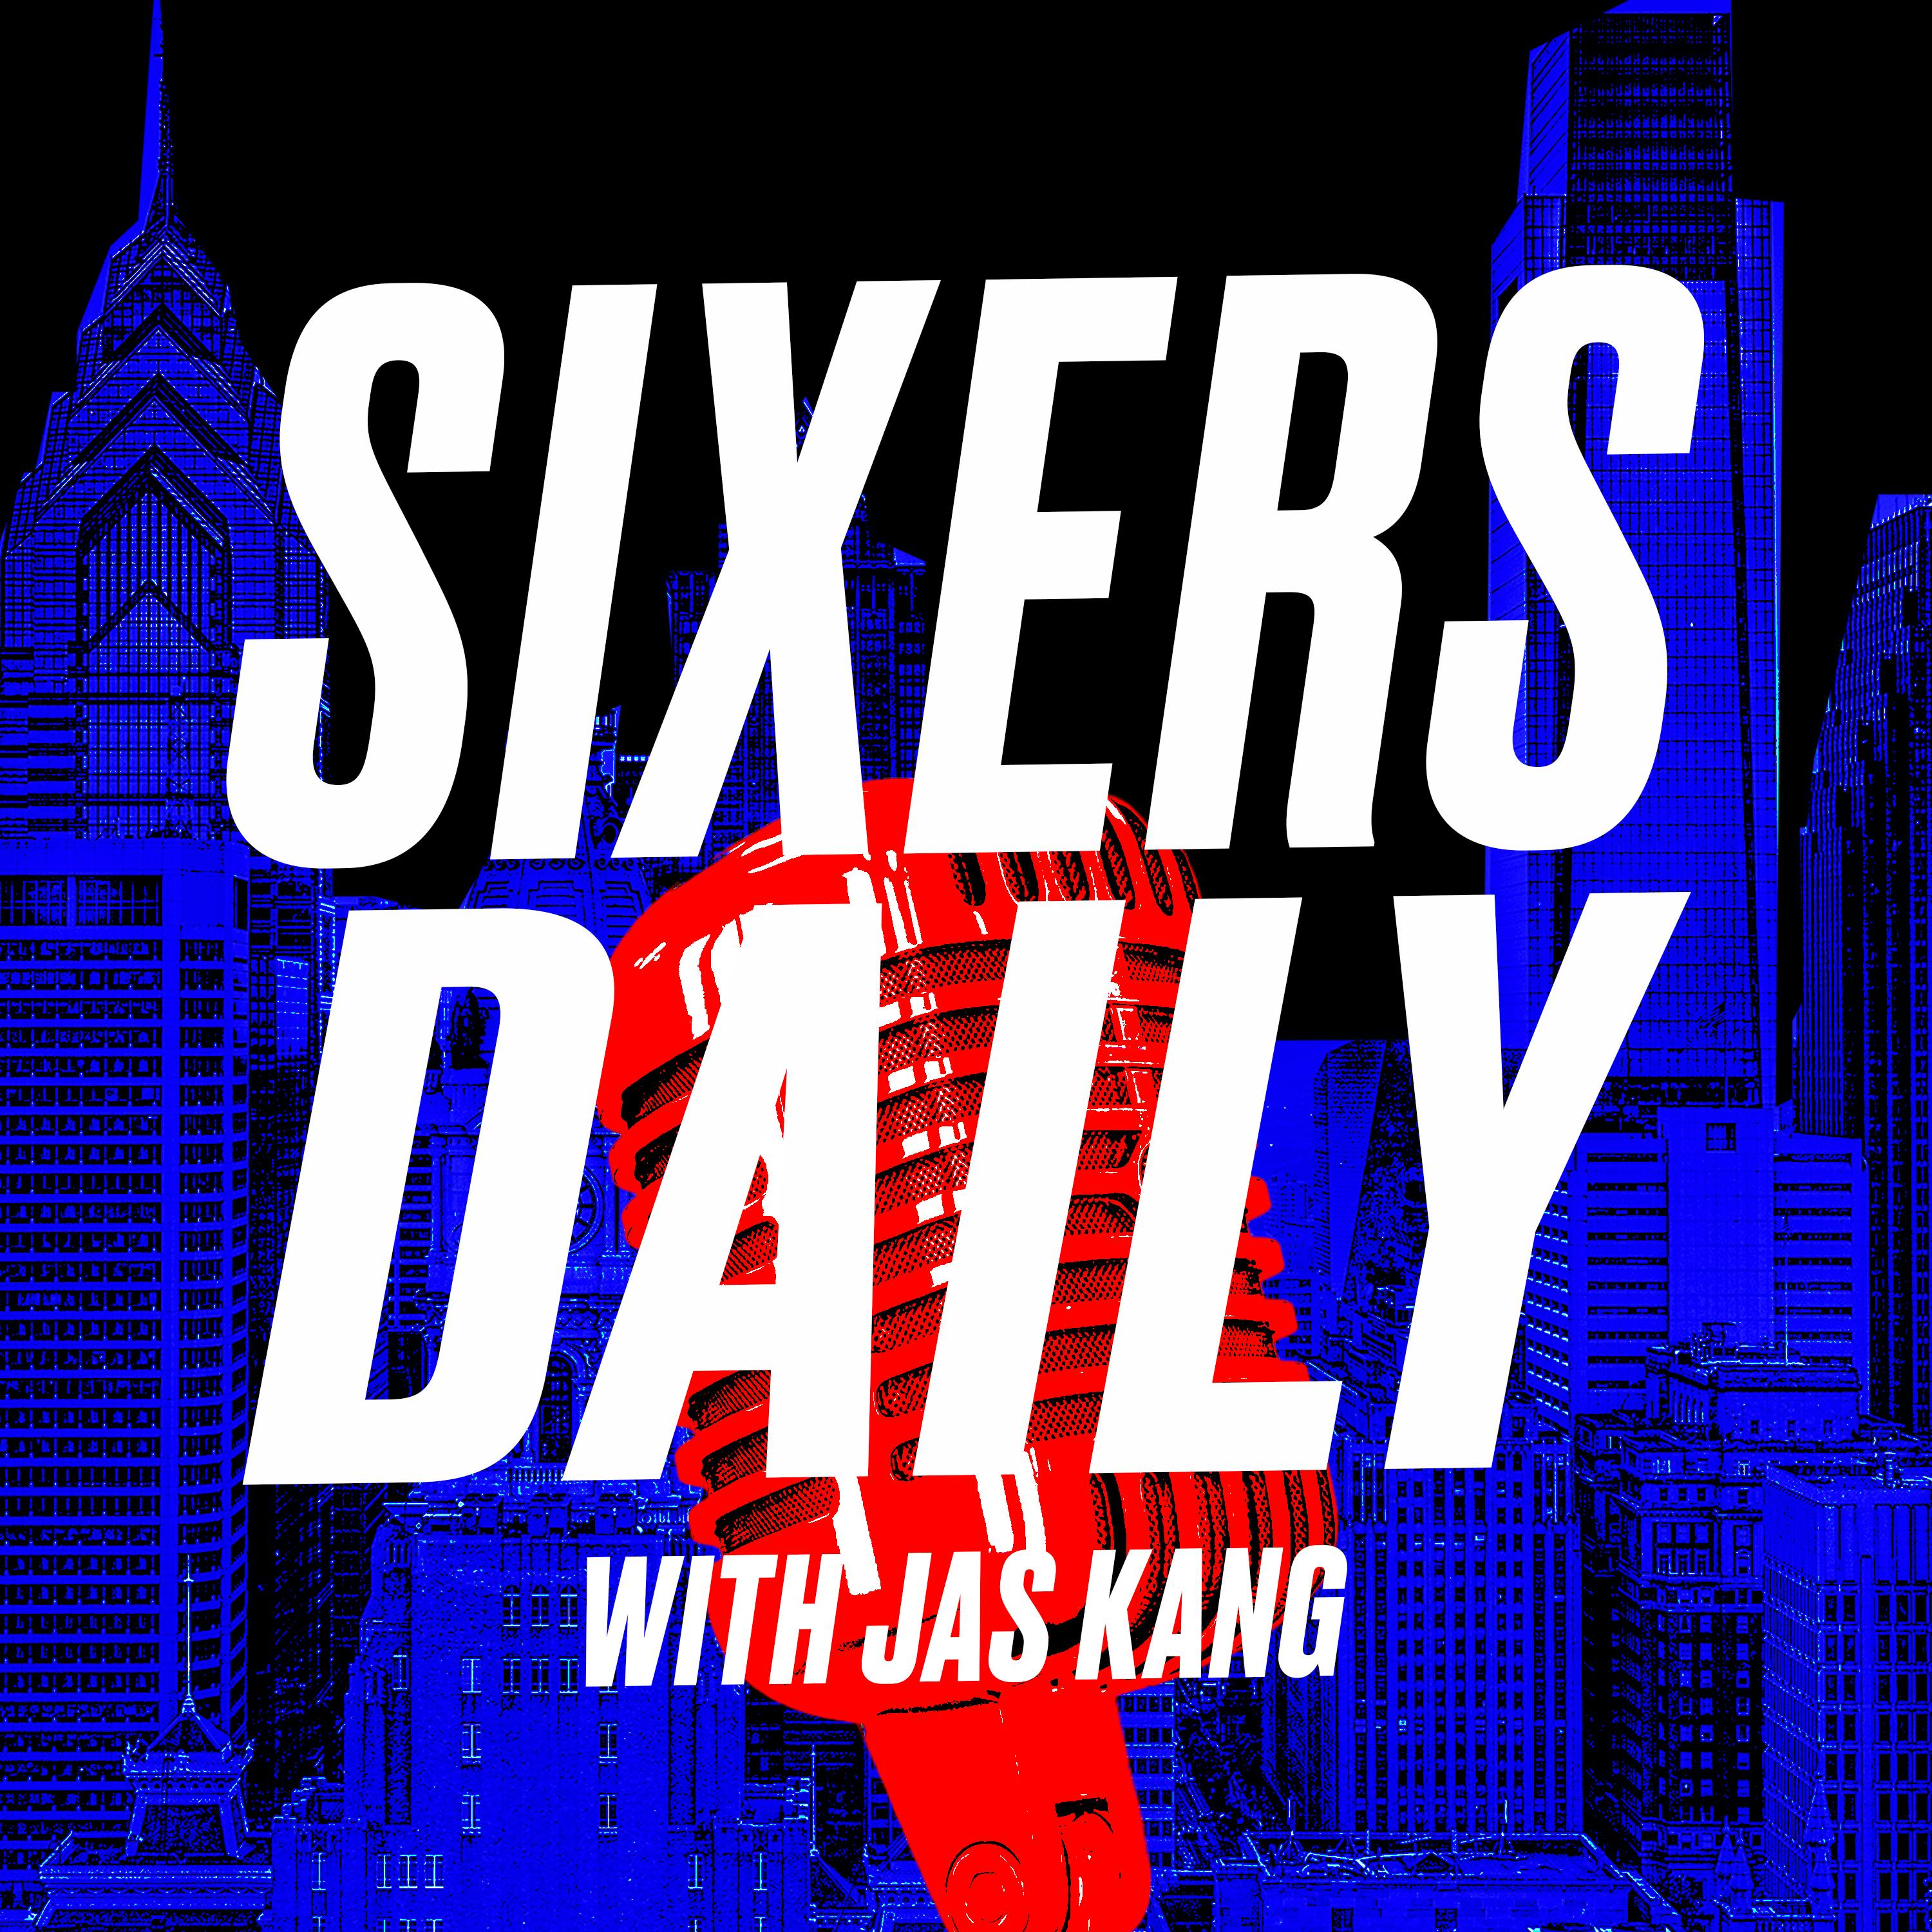 Sixers Daily with Jas Kang - NBA expansion, the Play-In Tournament, Montrezl Harrell's salary cap impact and Robert Sarver's suspension. With Bryan Toporek